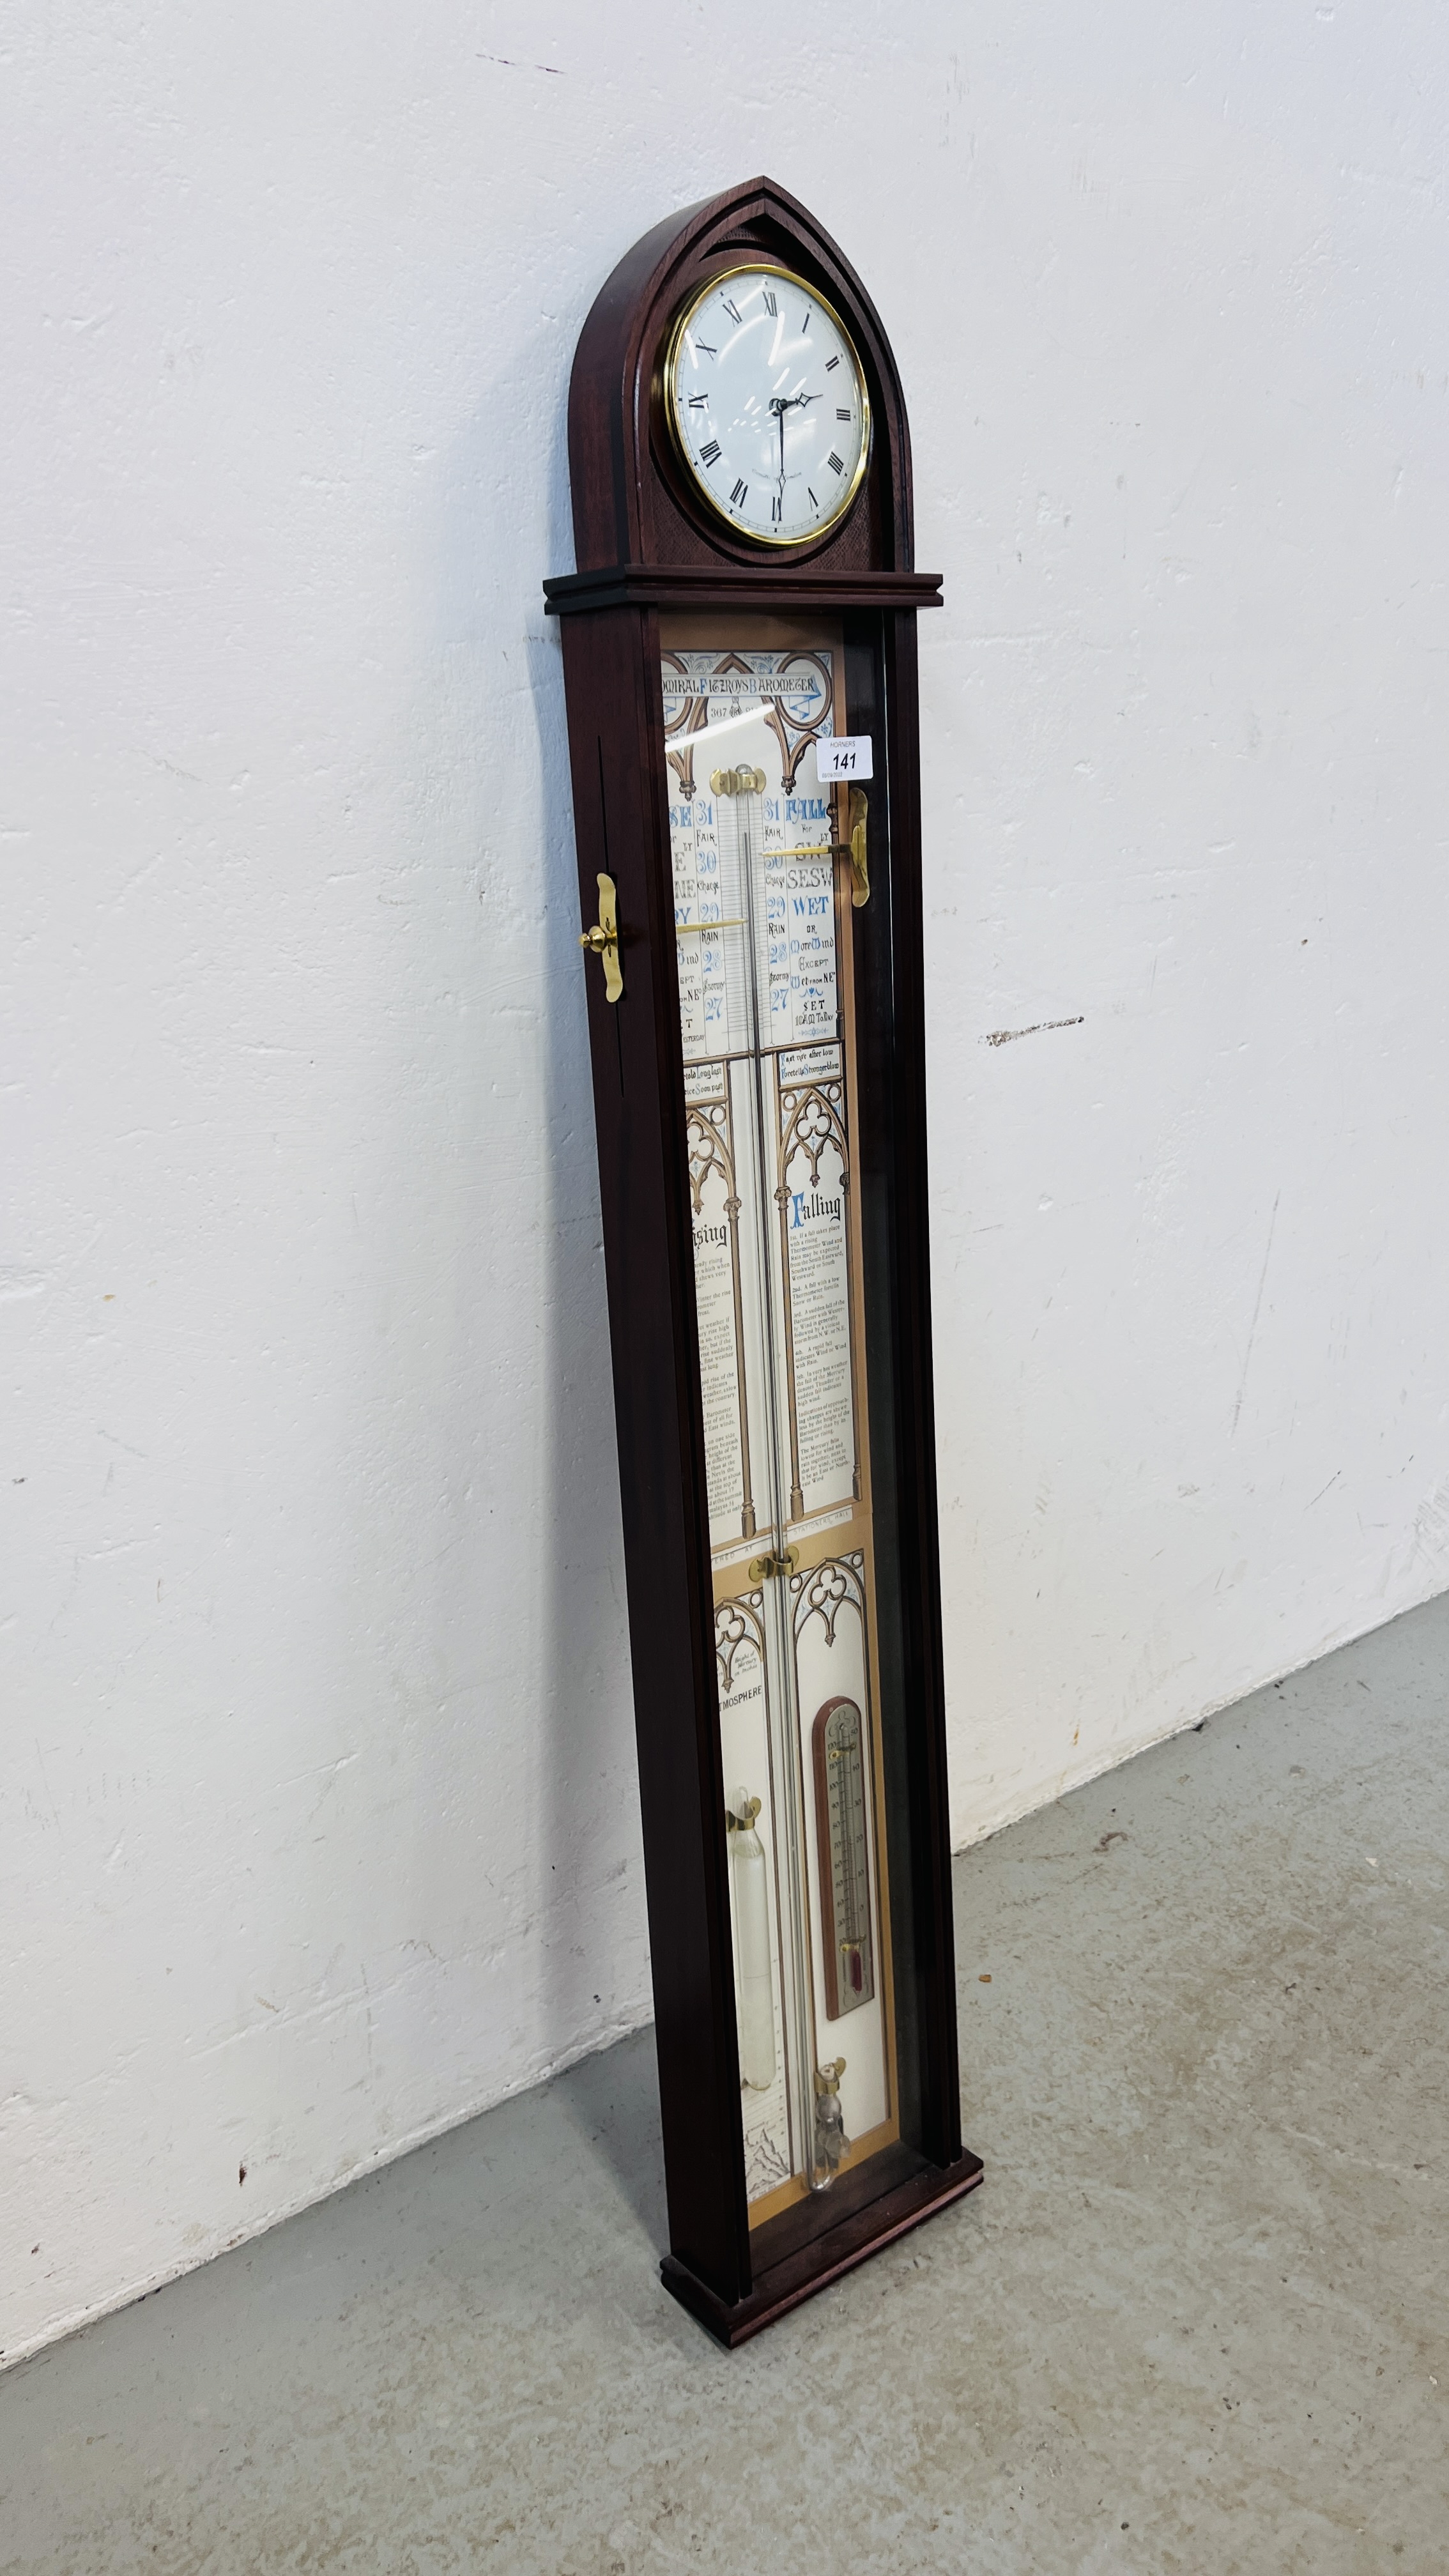 A REPRODUCTION COMITTI OF LONDON ADMIRAL FITZROY MERCURIAL BAROMETER. - Image 6 of 8